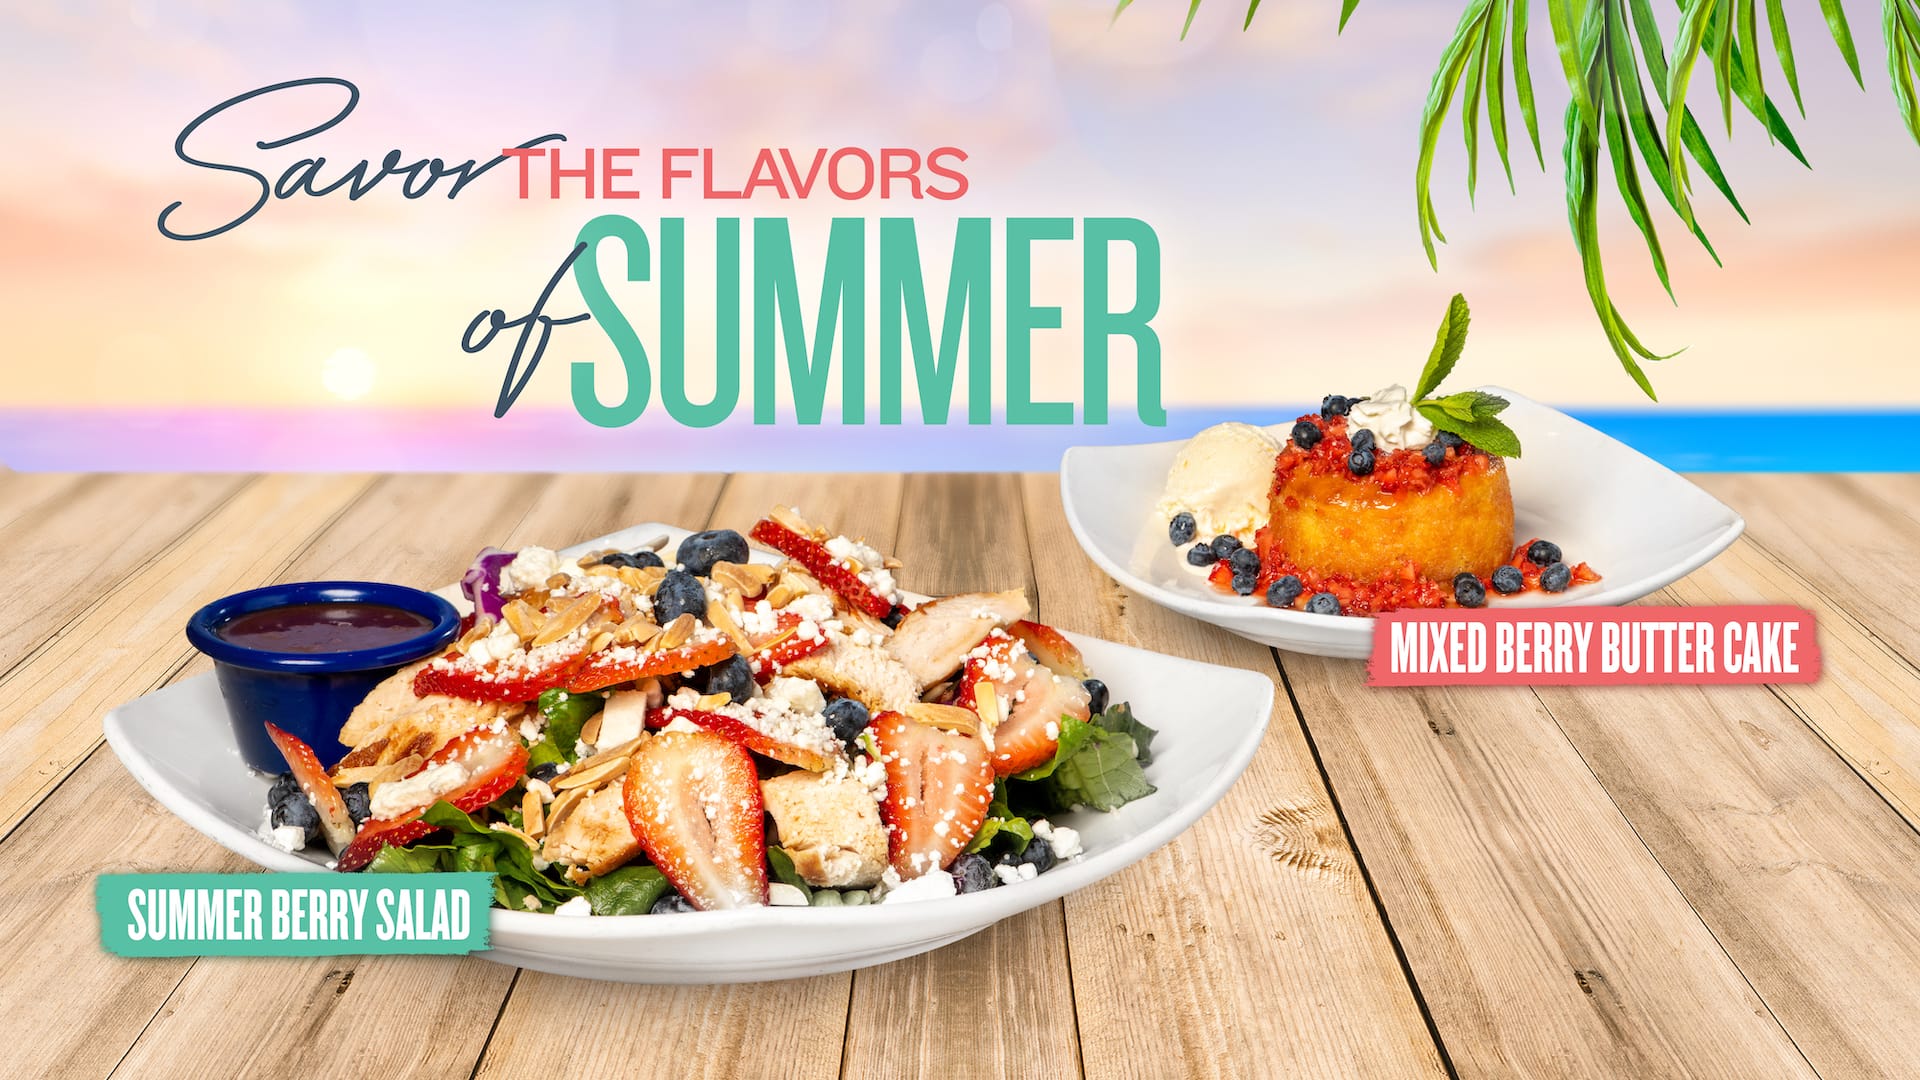 Savor the Flavors of Summer